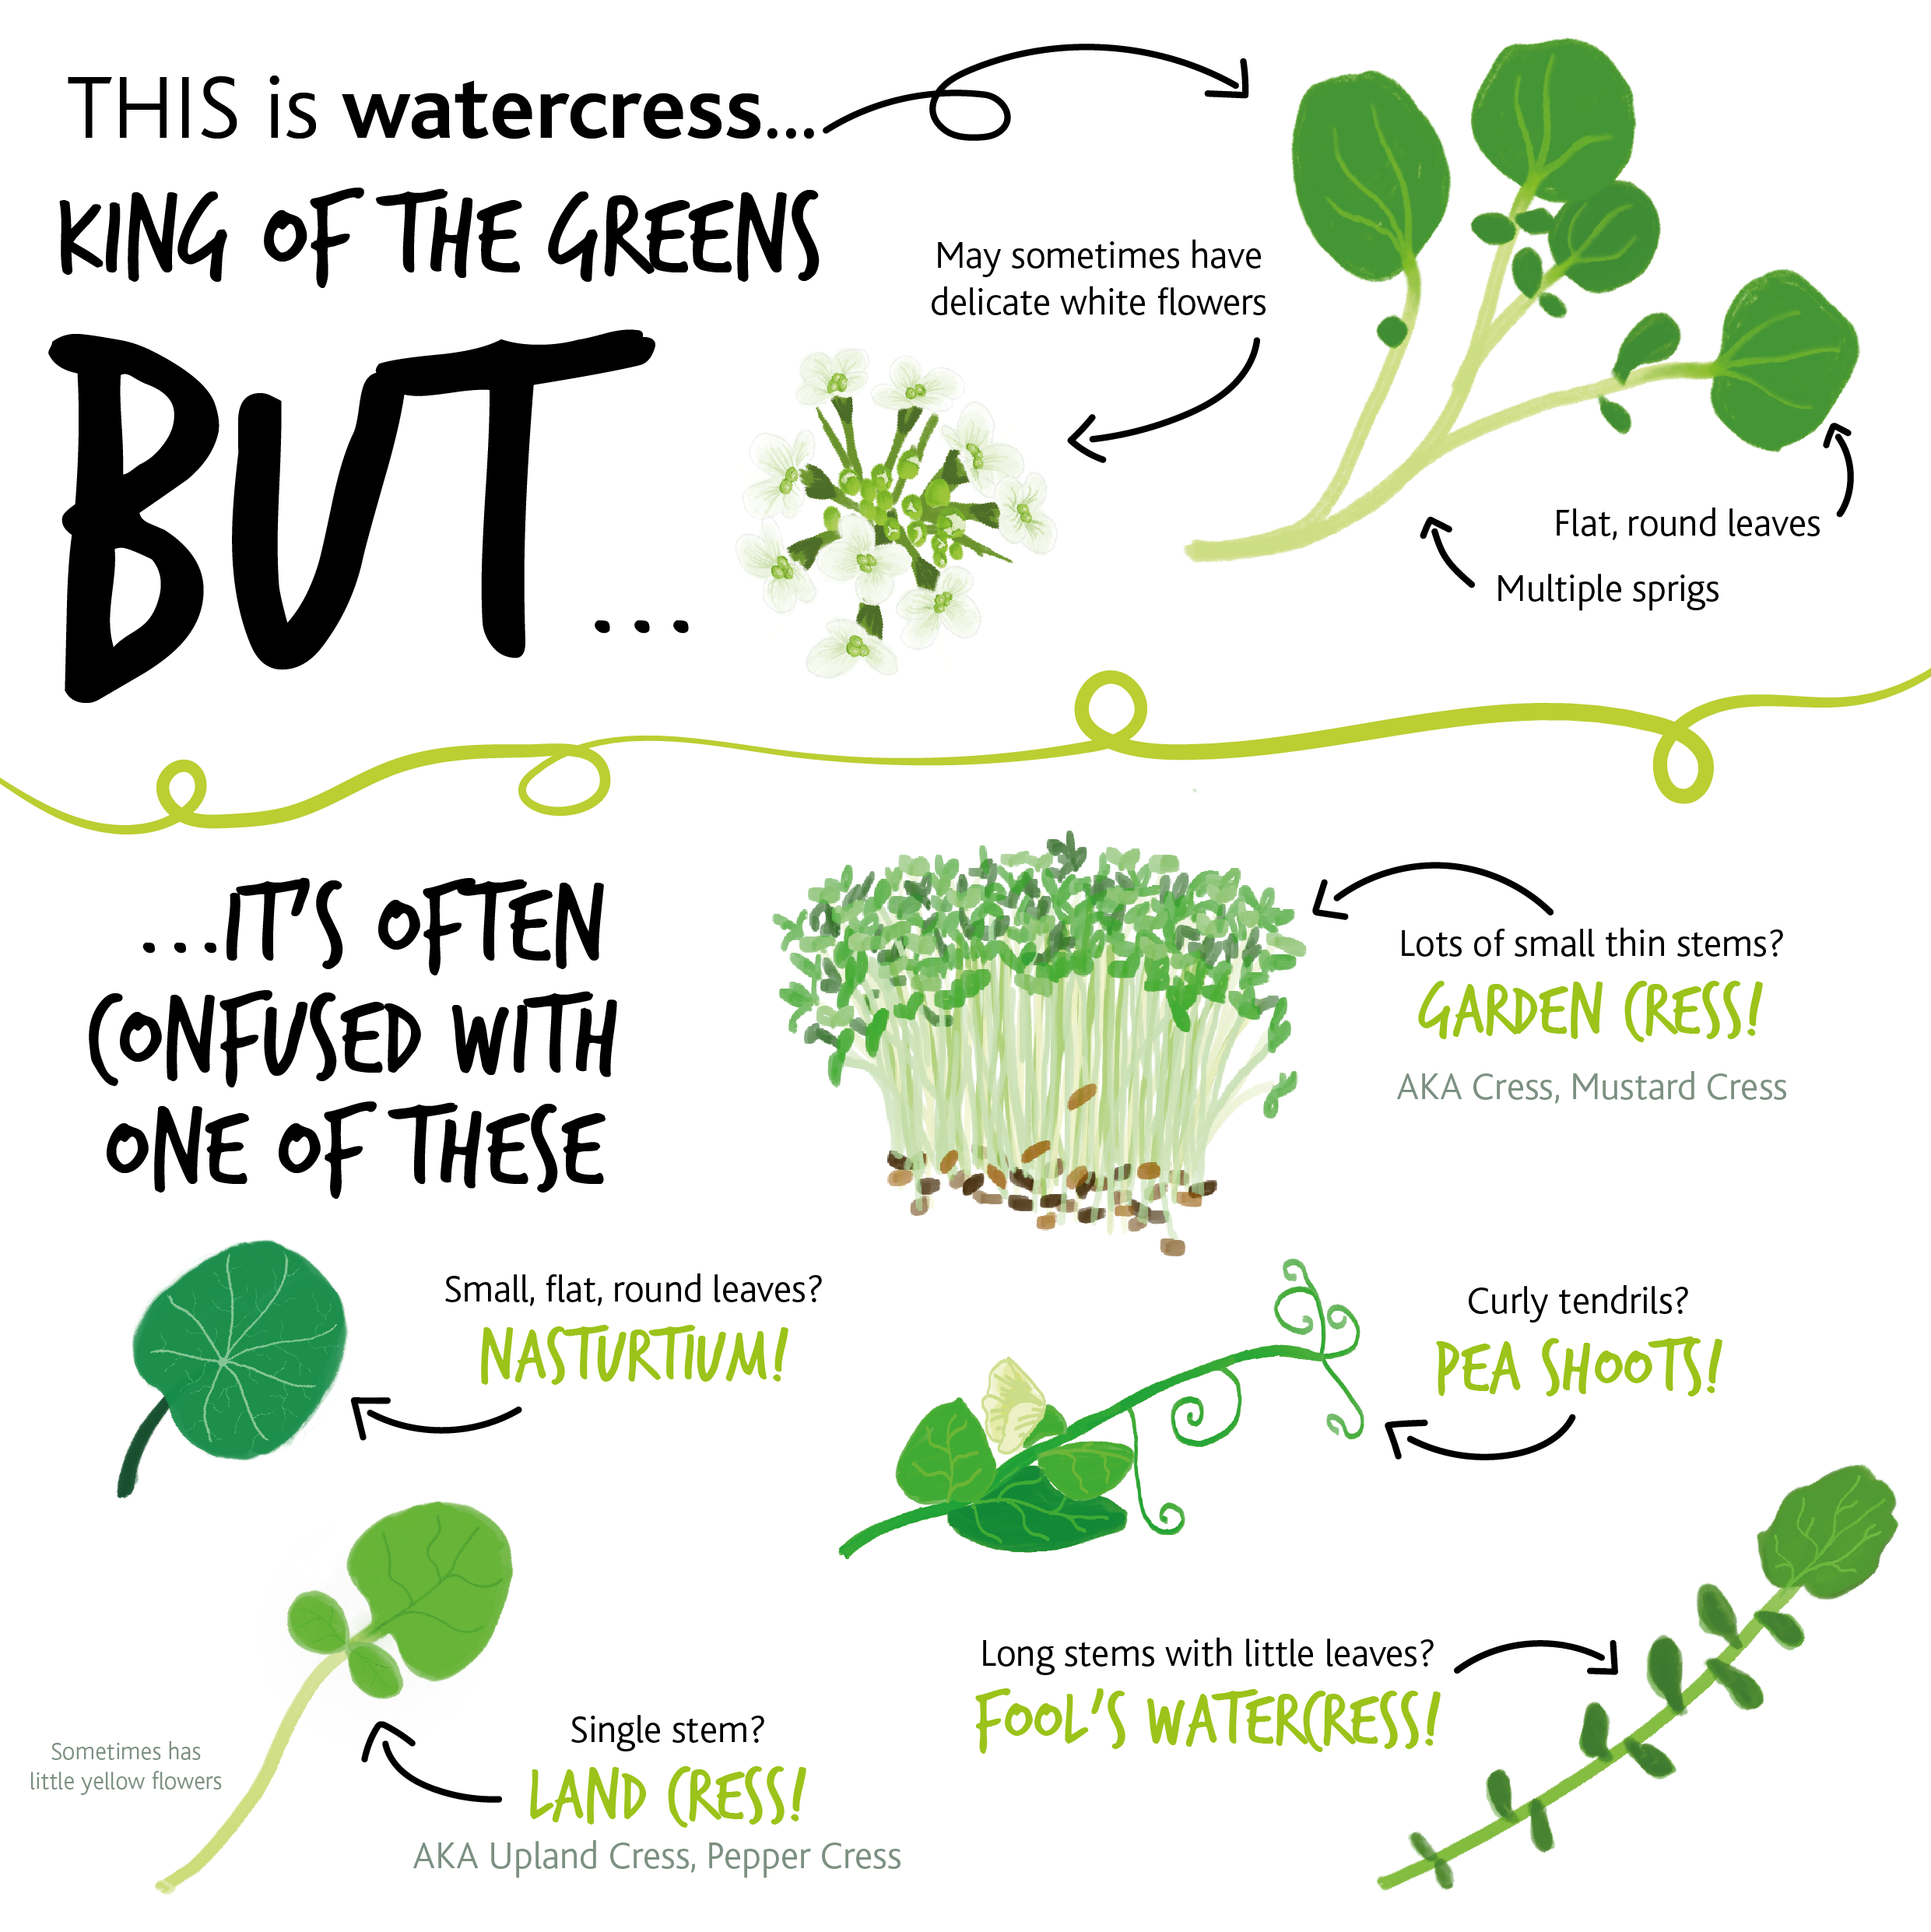 Why many different plant seedlings look like salad cress